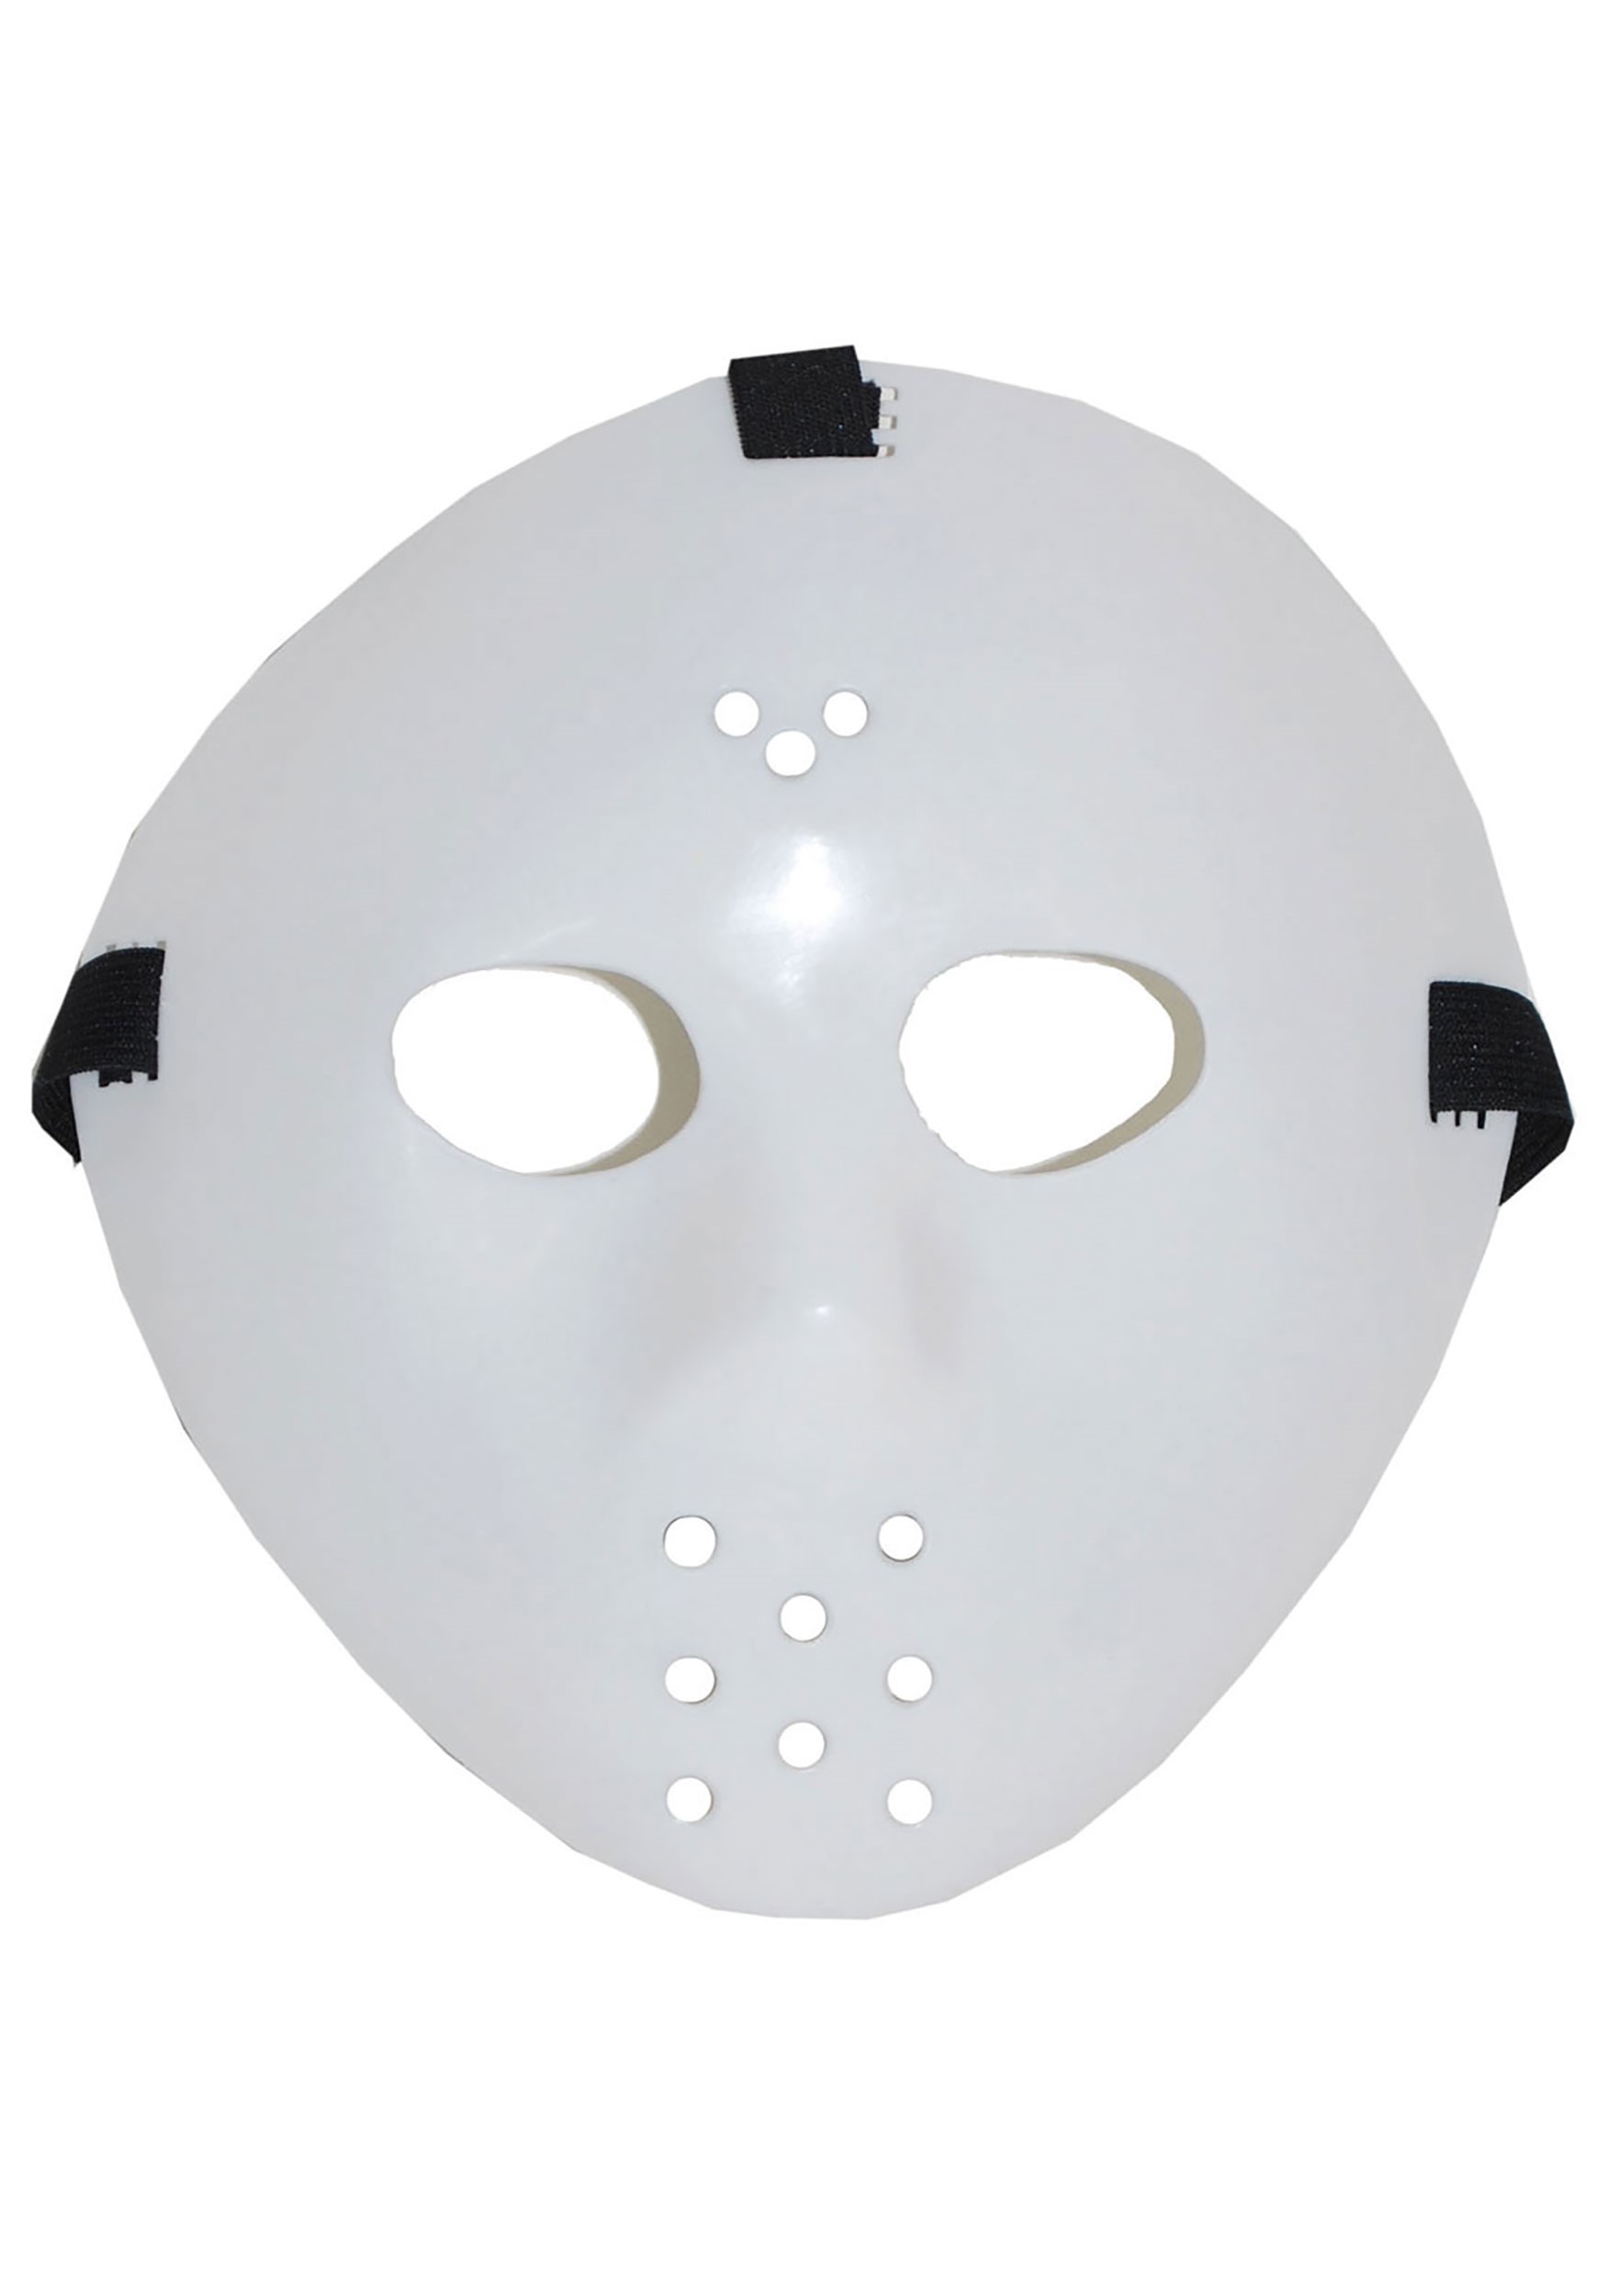 friday the 13th jason costume for kids